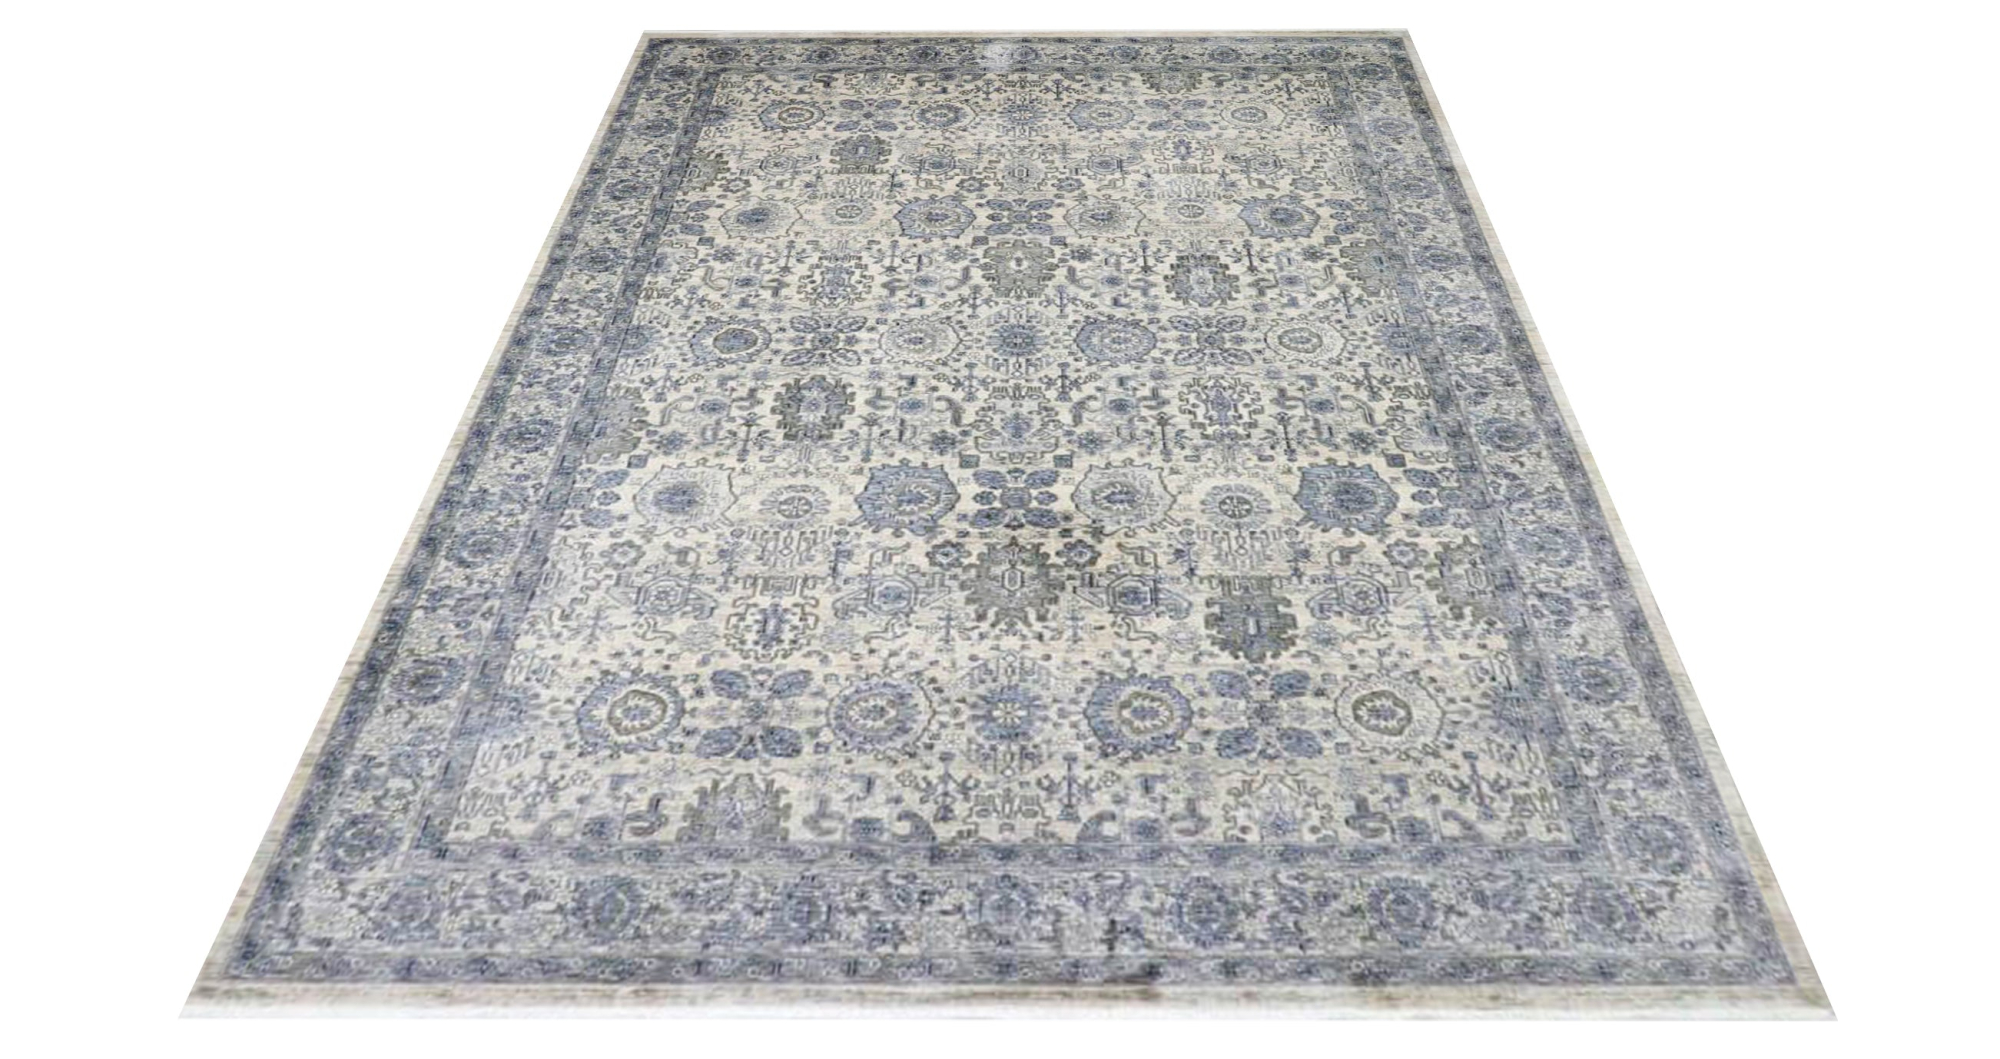 Rover Portobello Woven Rug-Area rug for living room, dining area, and bedroom